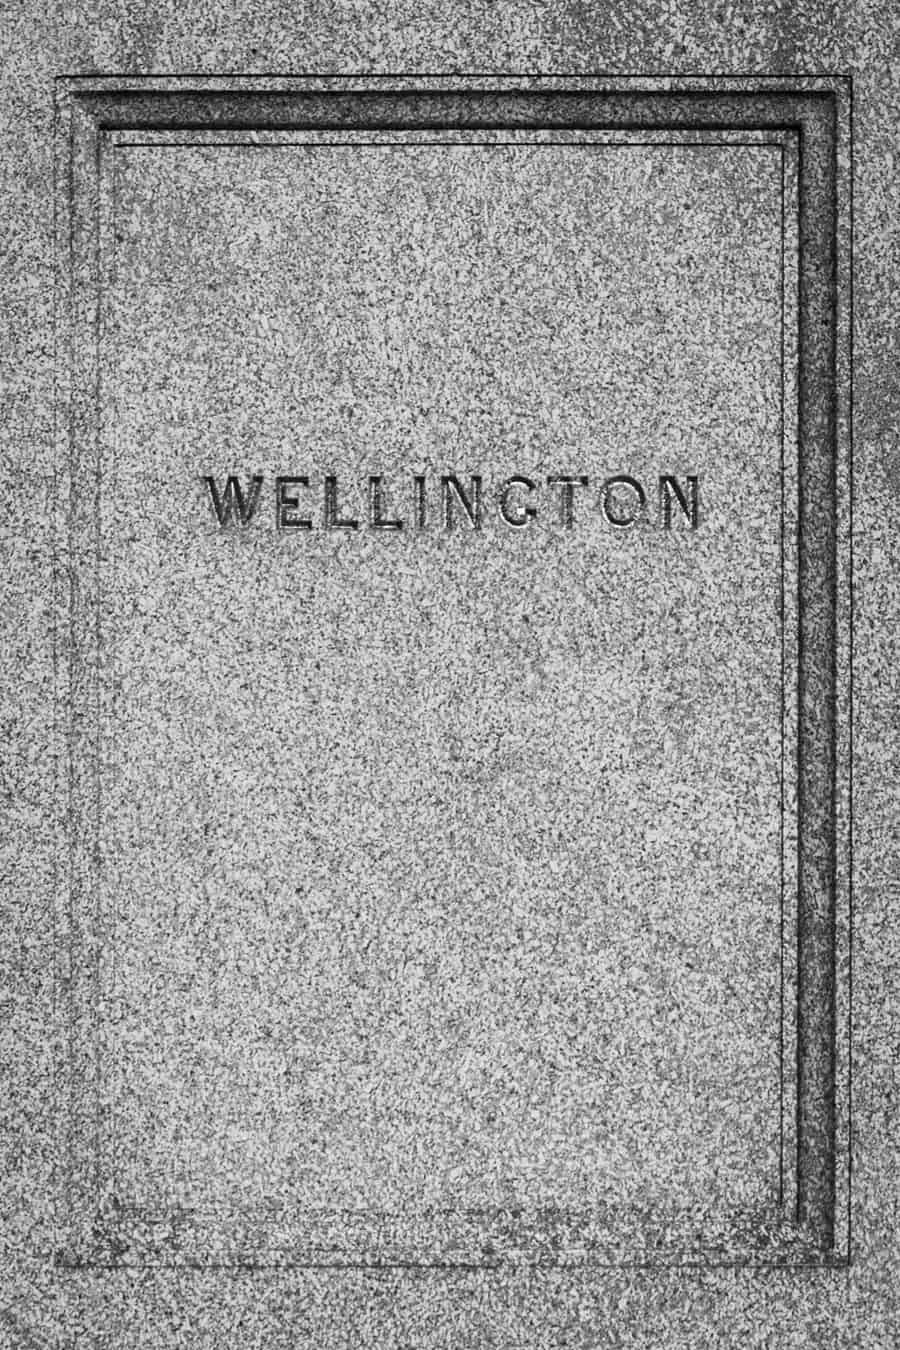  Wellington Memorial - black and white architecture photographer in Hampshire by Rick McEvoy 